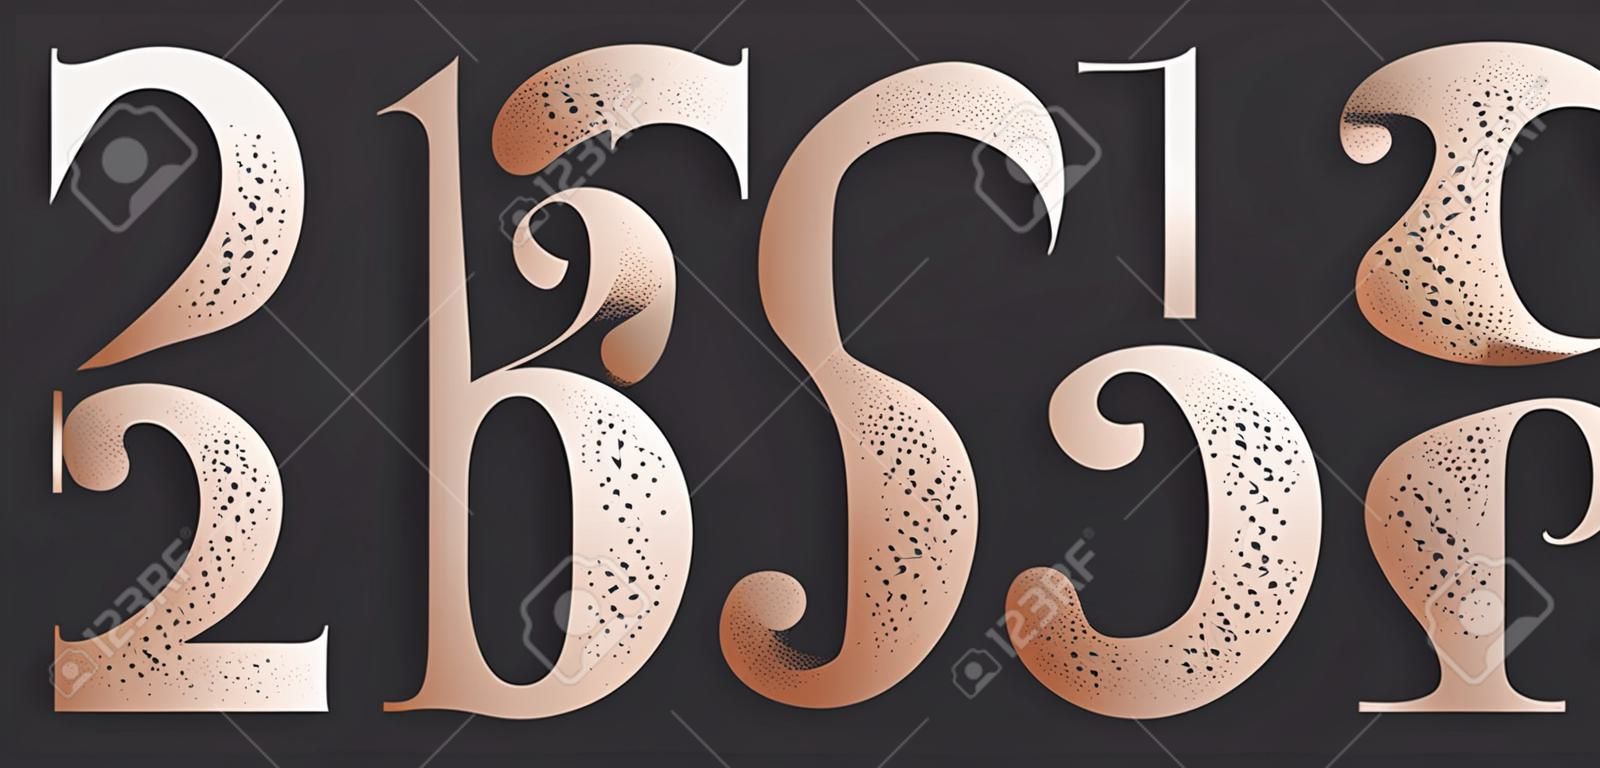 Number font. Font of numbers in classical french didot or didone style with contemporary geometric design and texture. Vintage and old school retro typographic for magazine. Vector Illustration